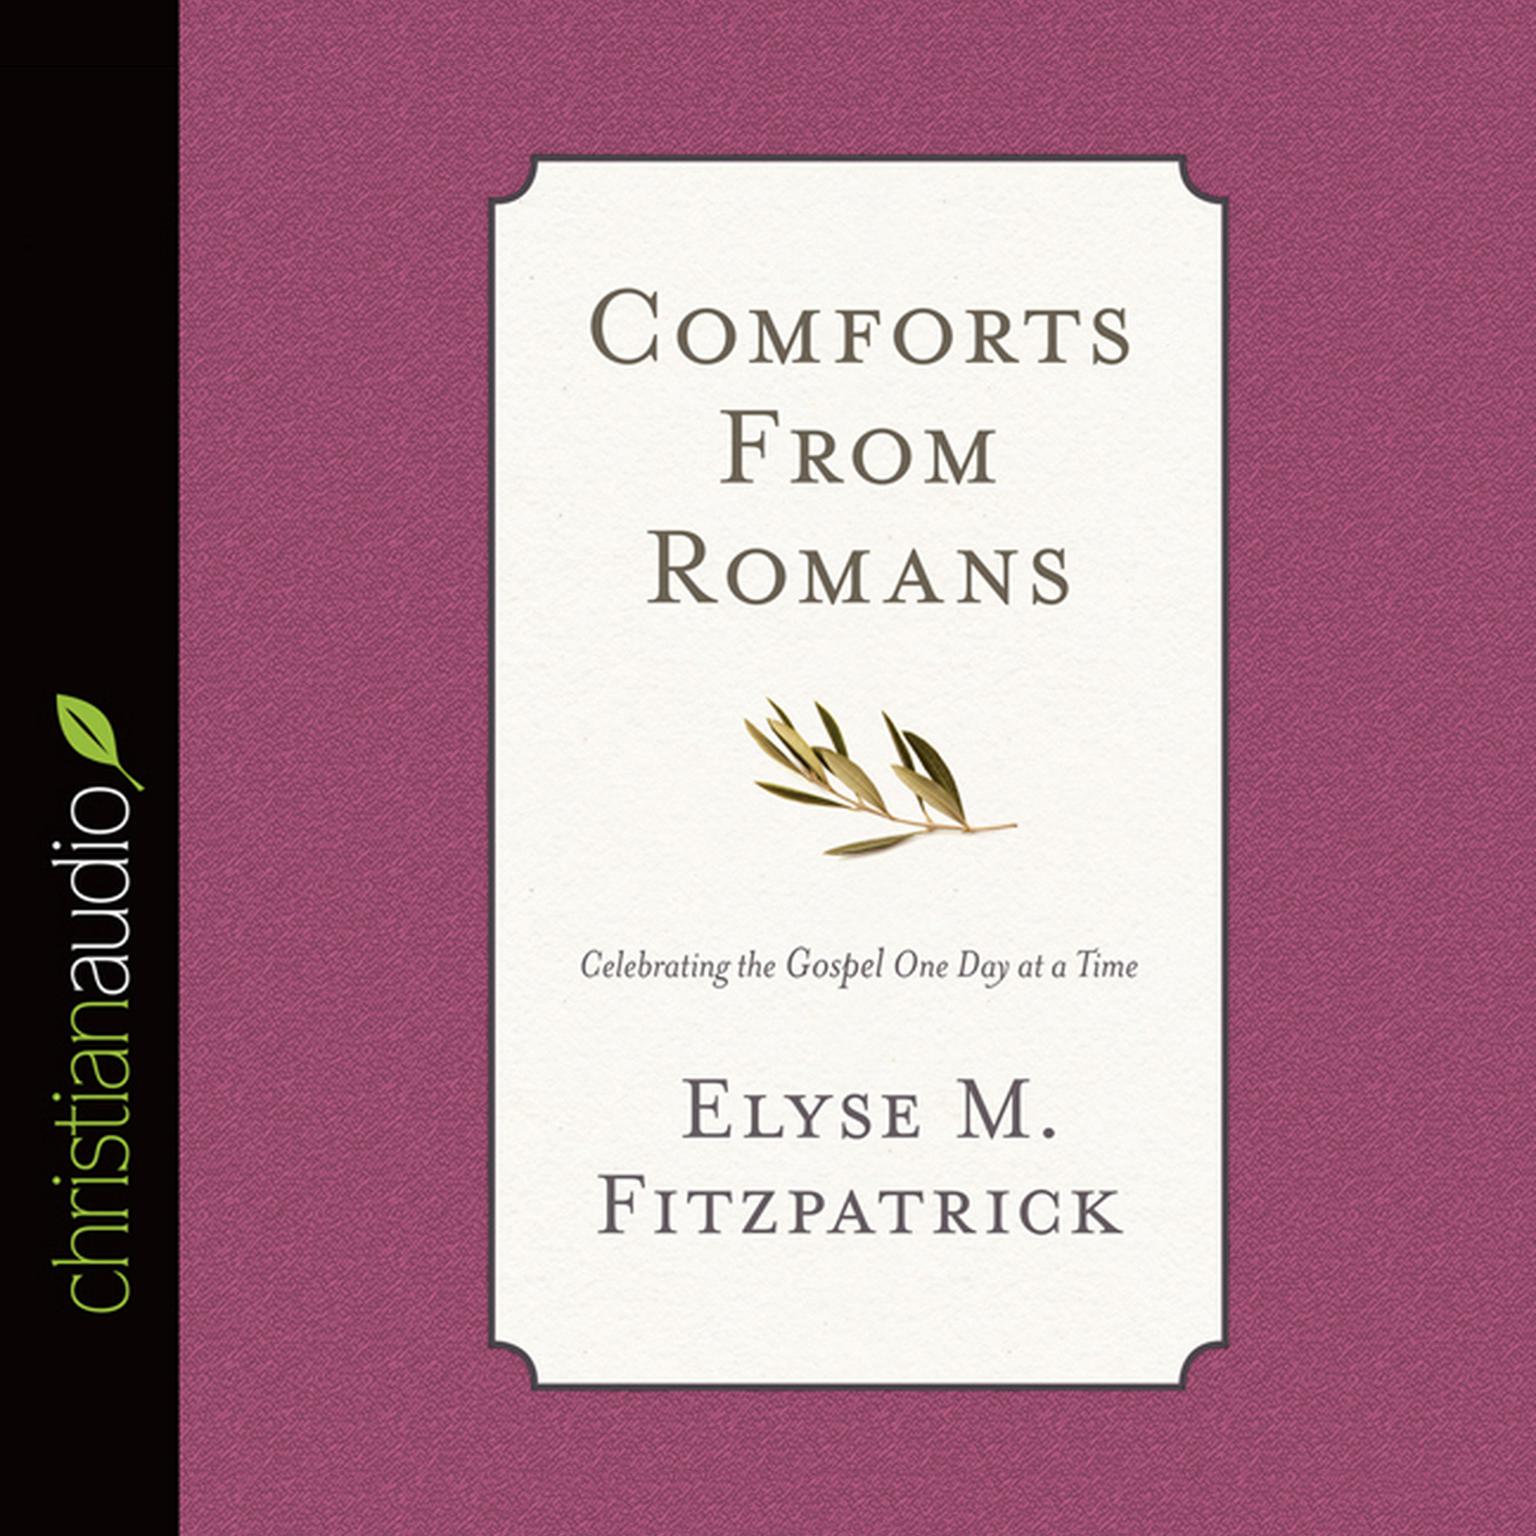 Comforts from Romans: Celebrating the Gospel One Day at a Time Audiobook, by Elyse M. Fitzpatrick